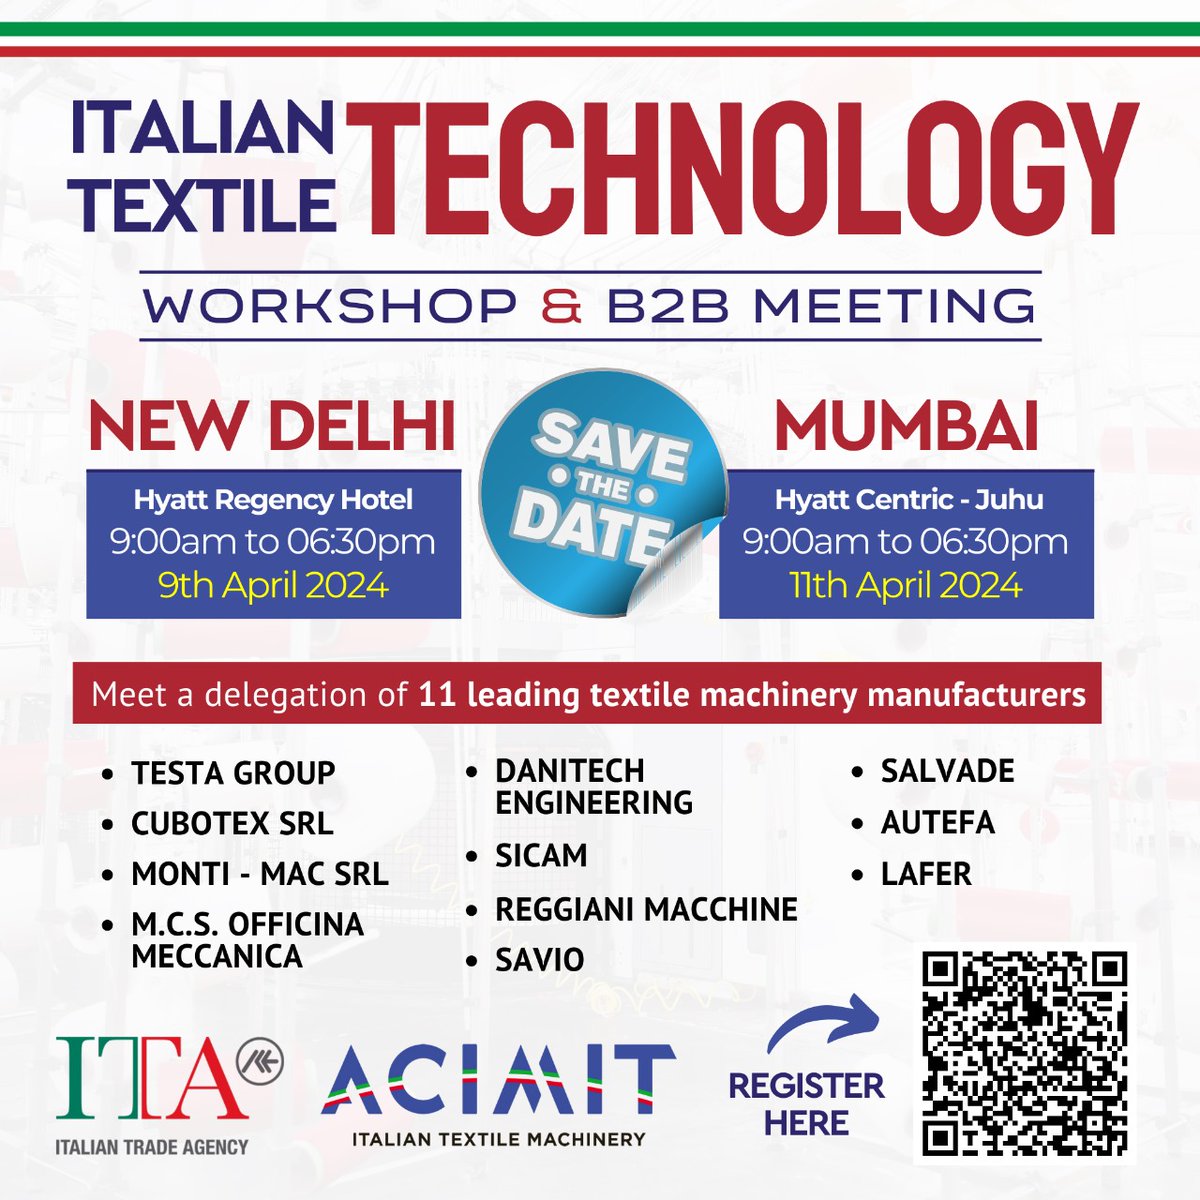 Don't miss out on the Italian Textile Technology event in Mumbai on April 11th, 2024! Join ITA and ACIMIT for a conference featuring 11 leading Italian Textile Machinery Manufacturers.

Register Here: docs.google.com/forms/d/e/1FAI…

#ItalianTextileMachinery #ACIMIT #TextileIndustry